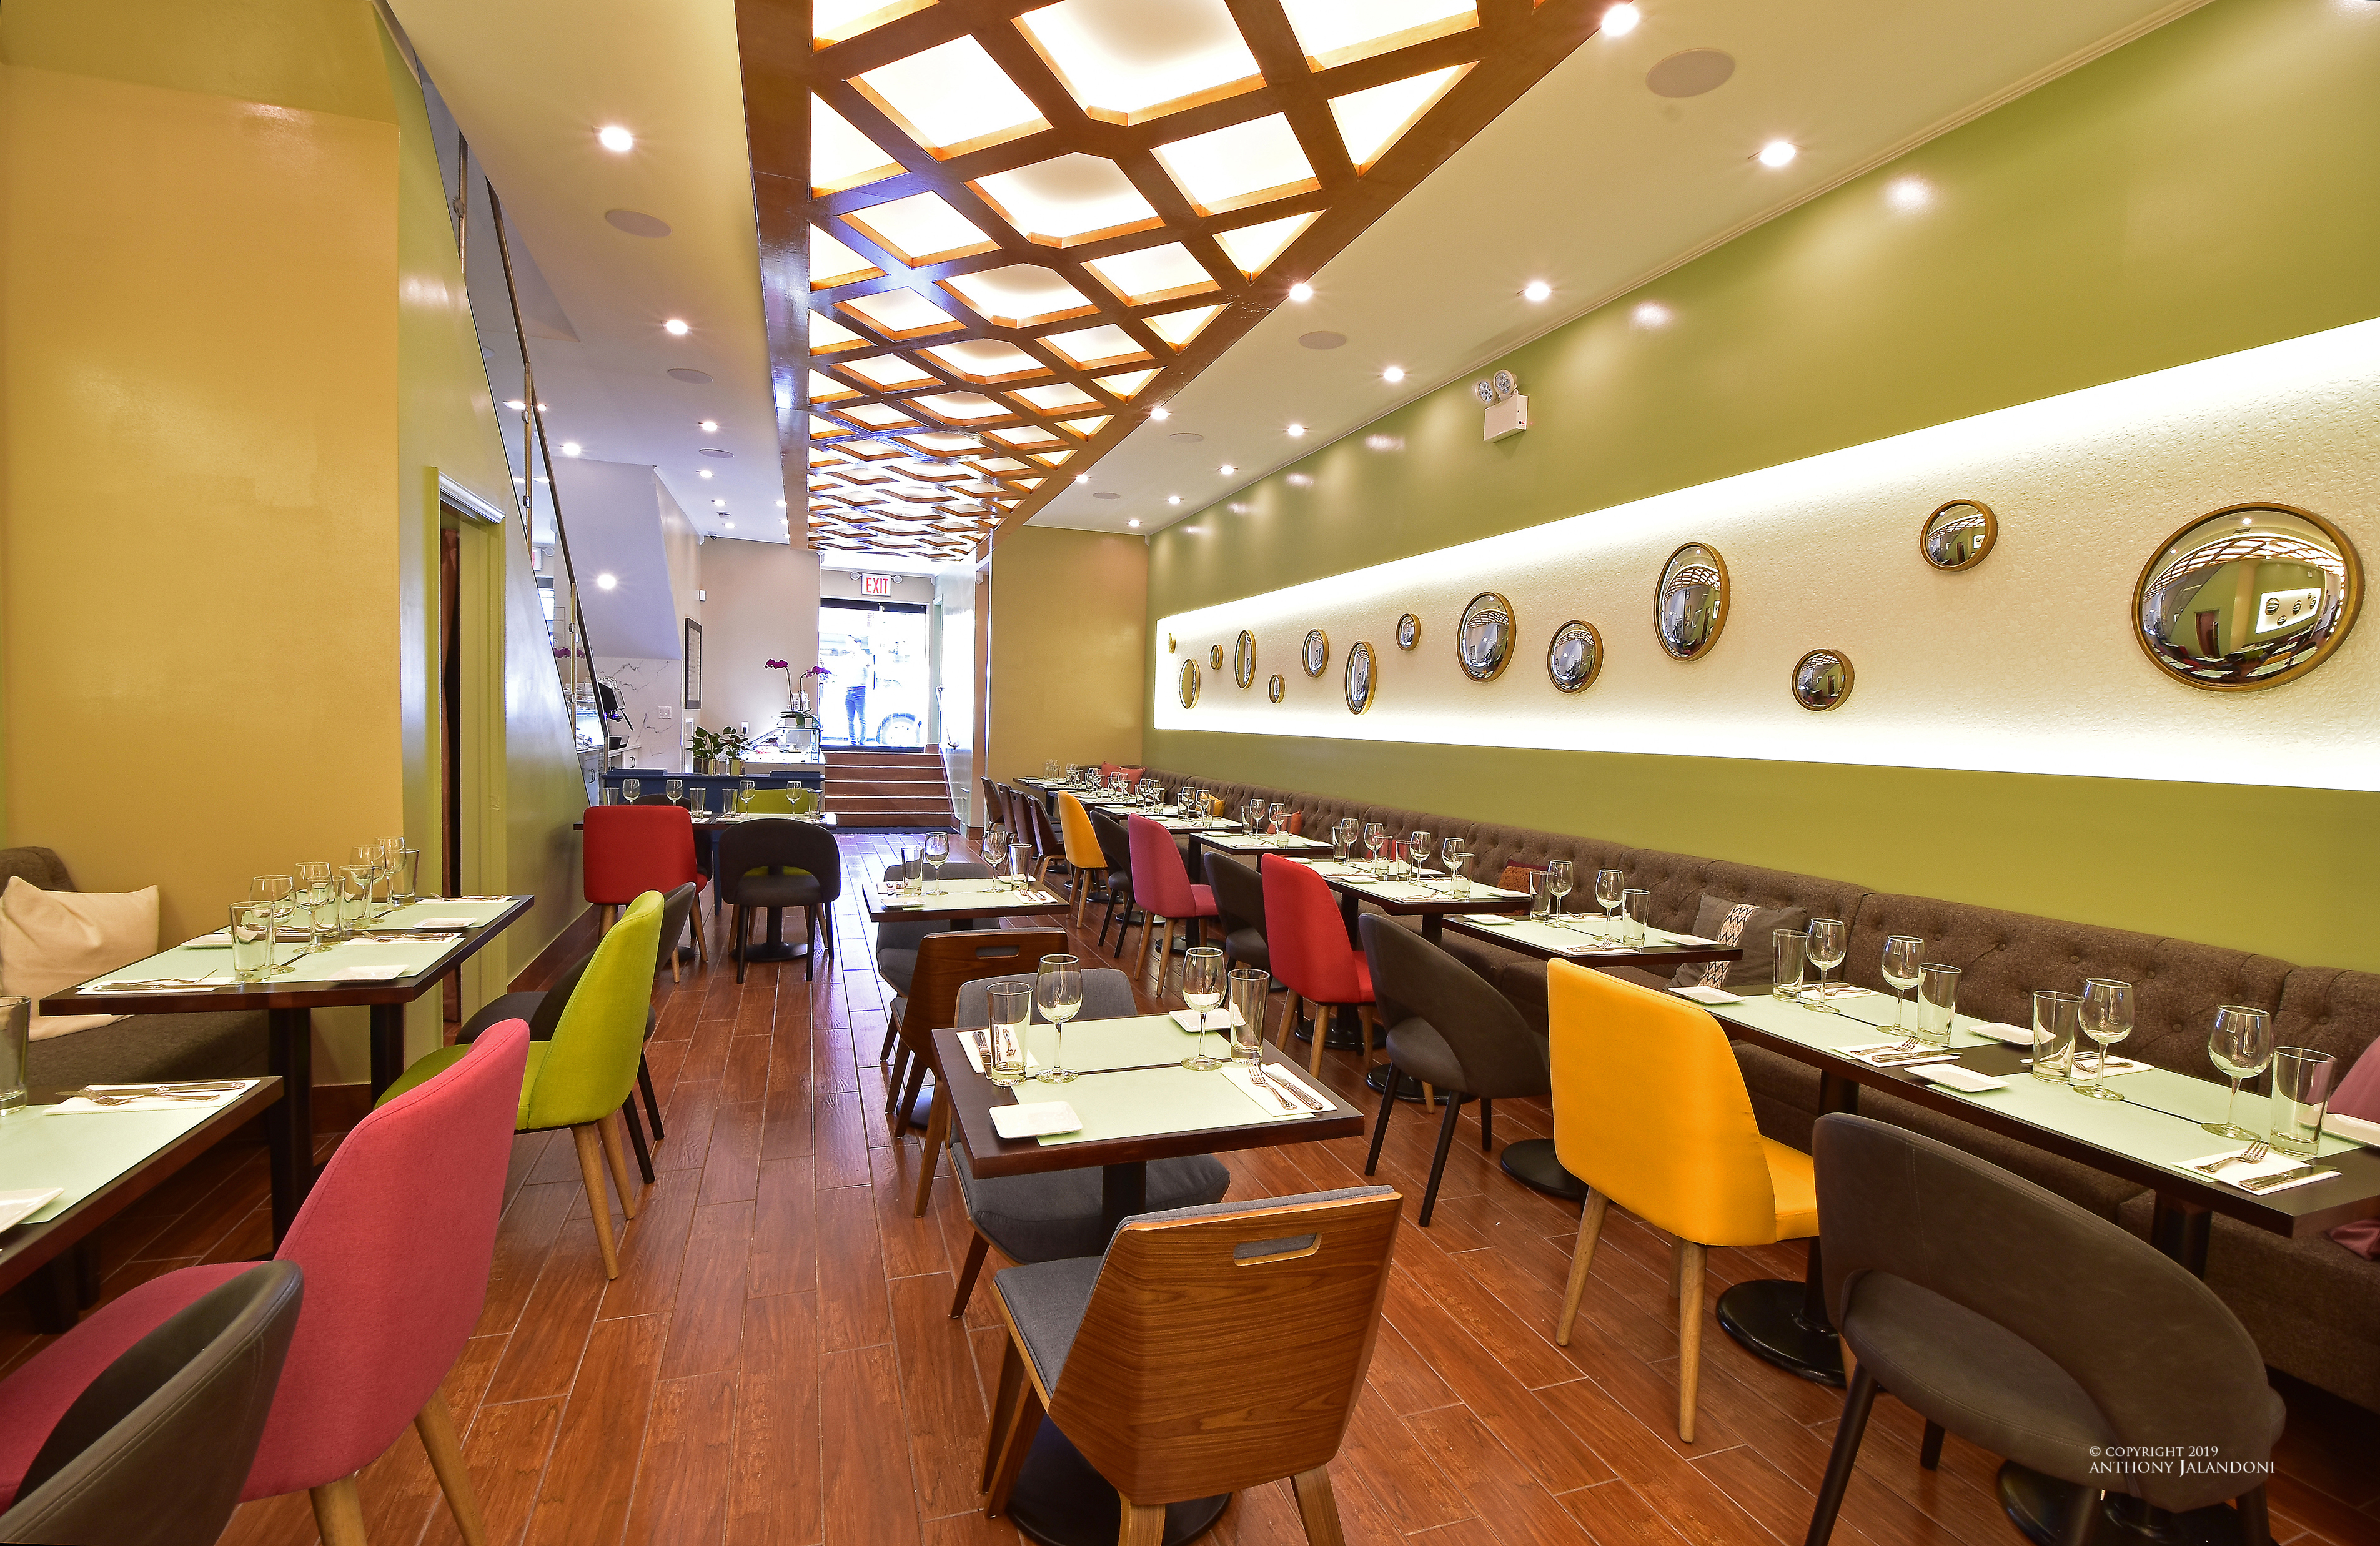 The green interior of a restaurant with colorful chairs and round mirrors on the walls